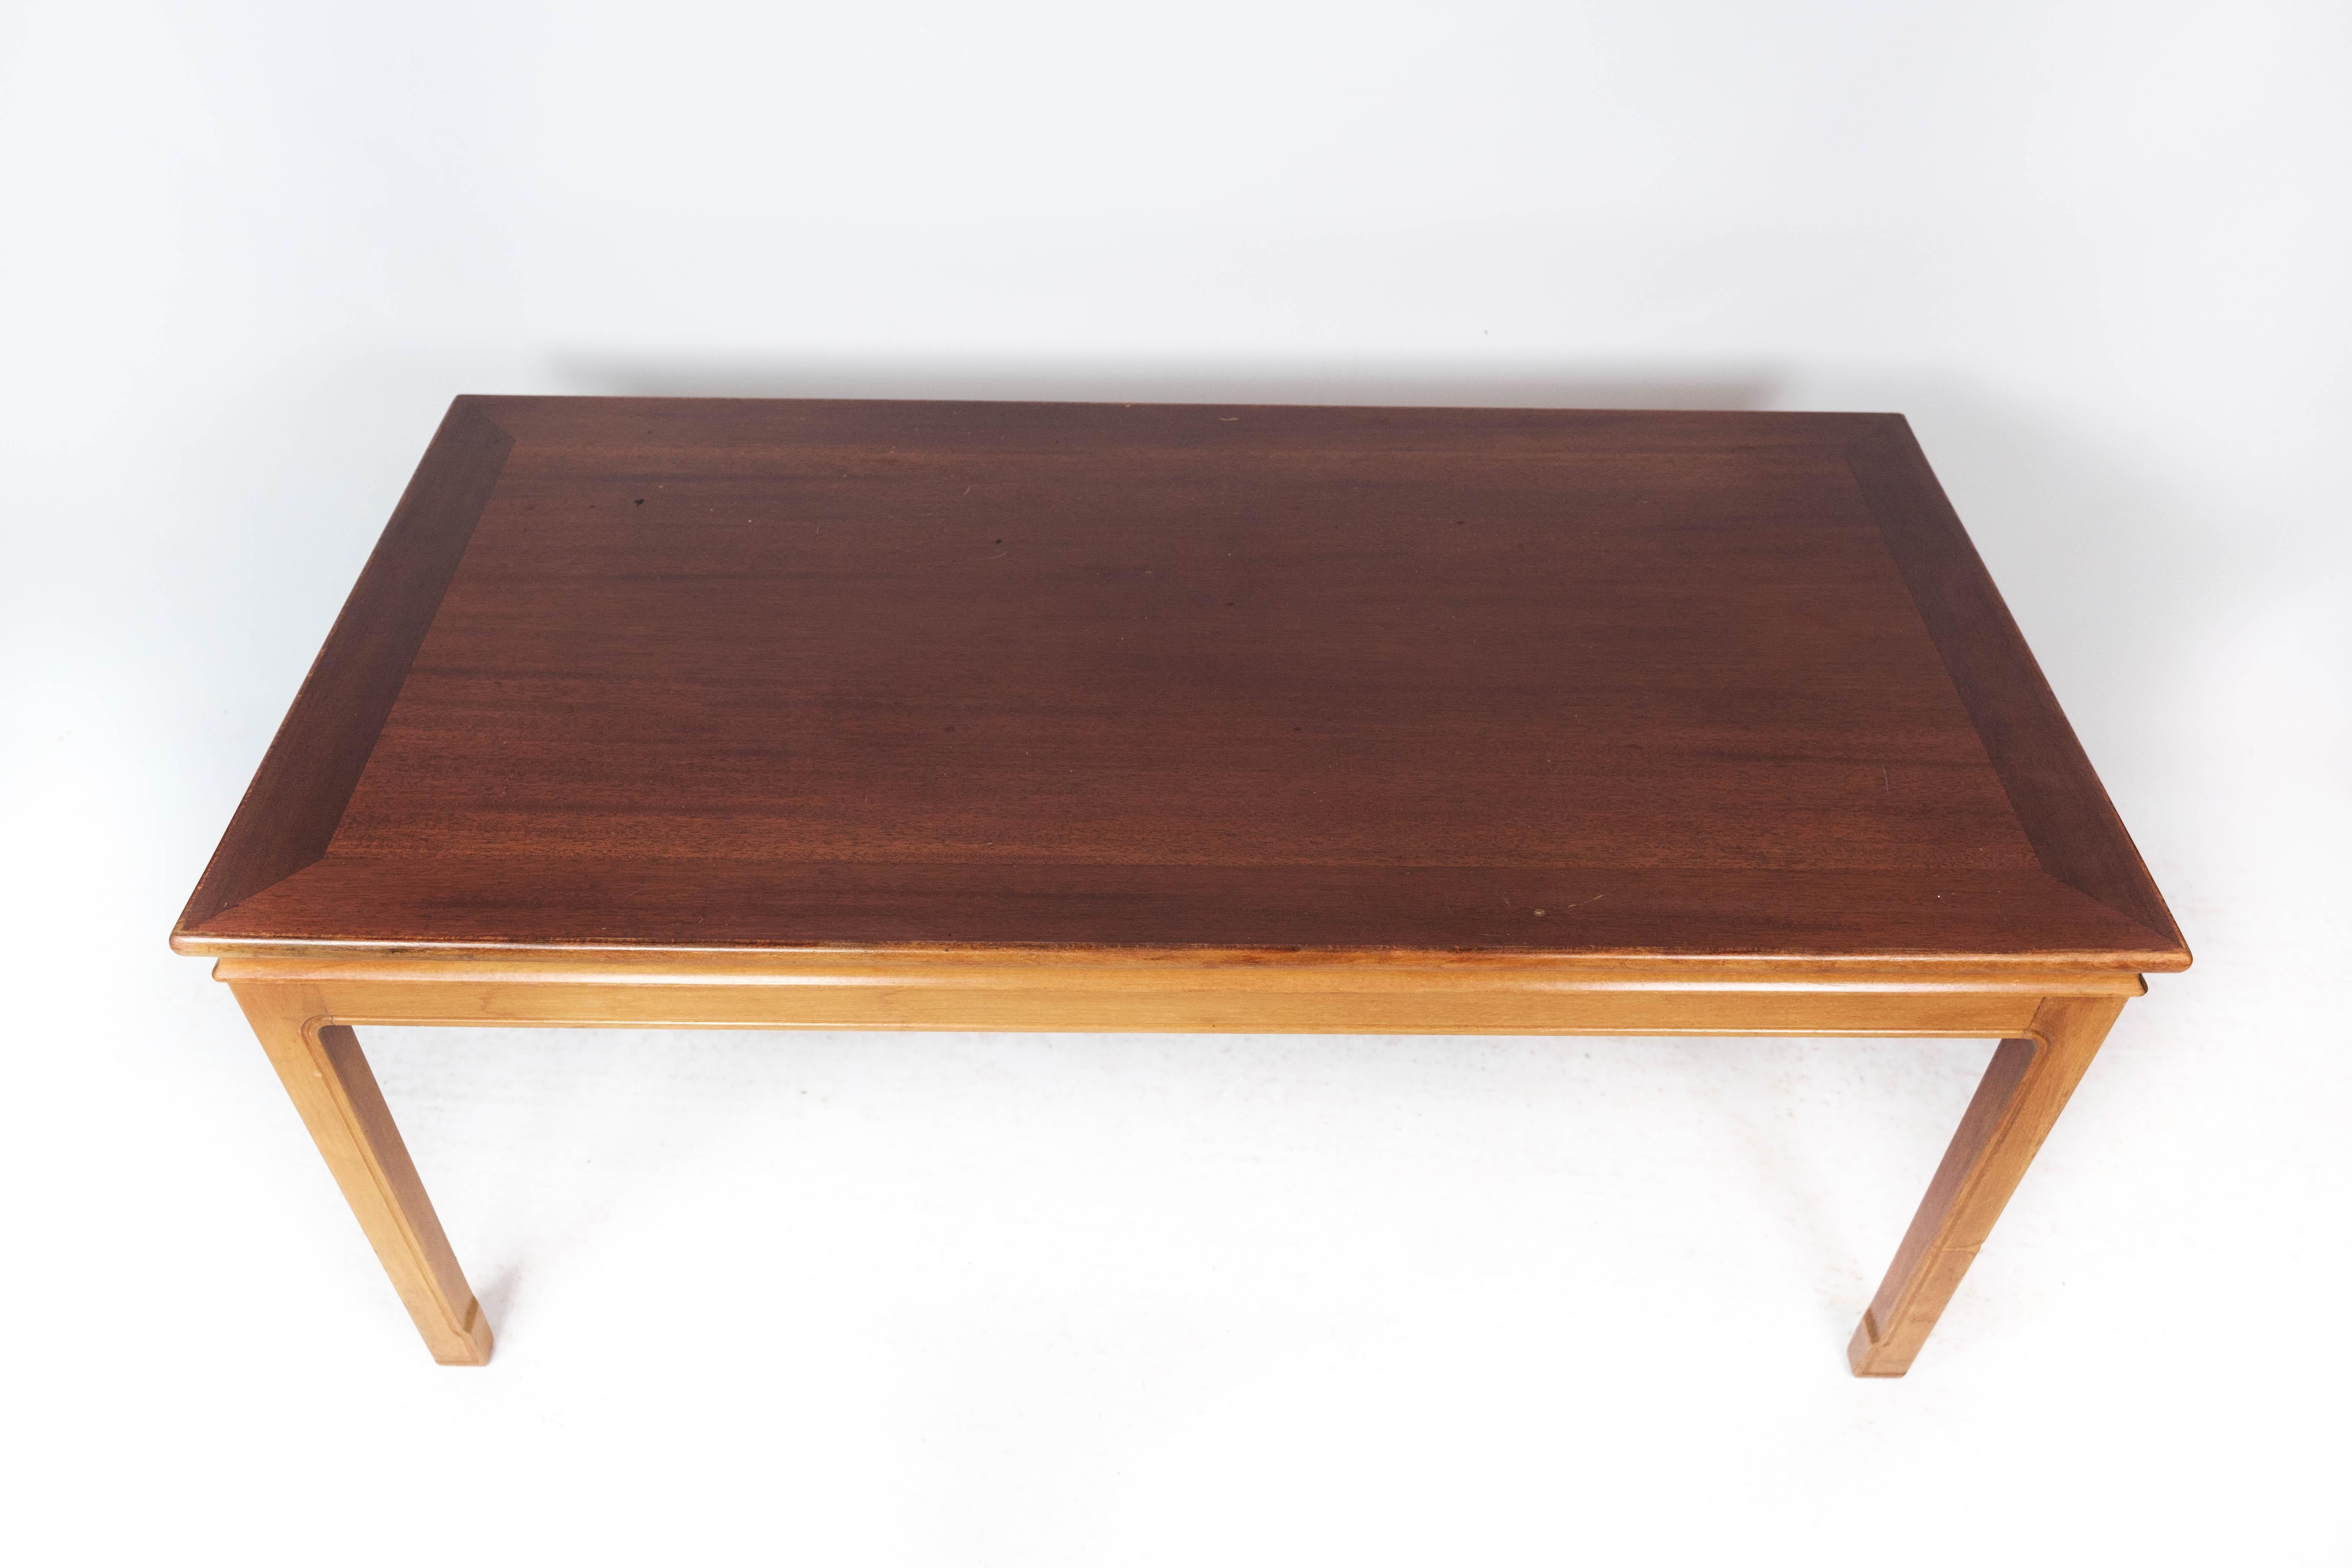 The coffee table crafted from light mahogany and boasting Danish design from the 1960s is a beautiful fusion of style and functionality.

Mahogany, known for its rich color and elegant grain patterns, adds a touch of sophistication to the table. The